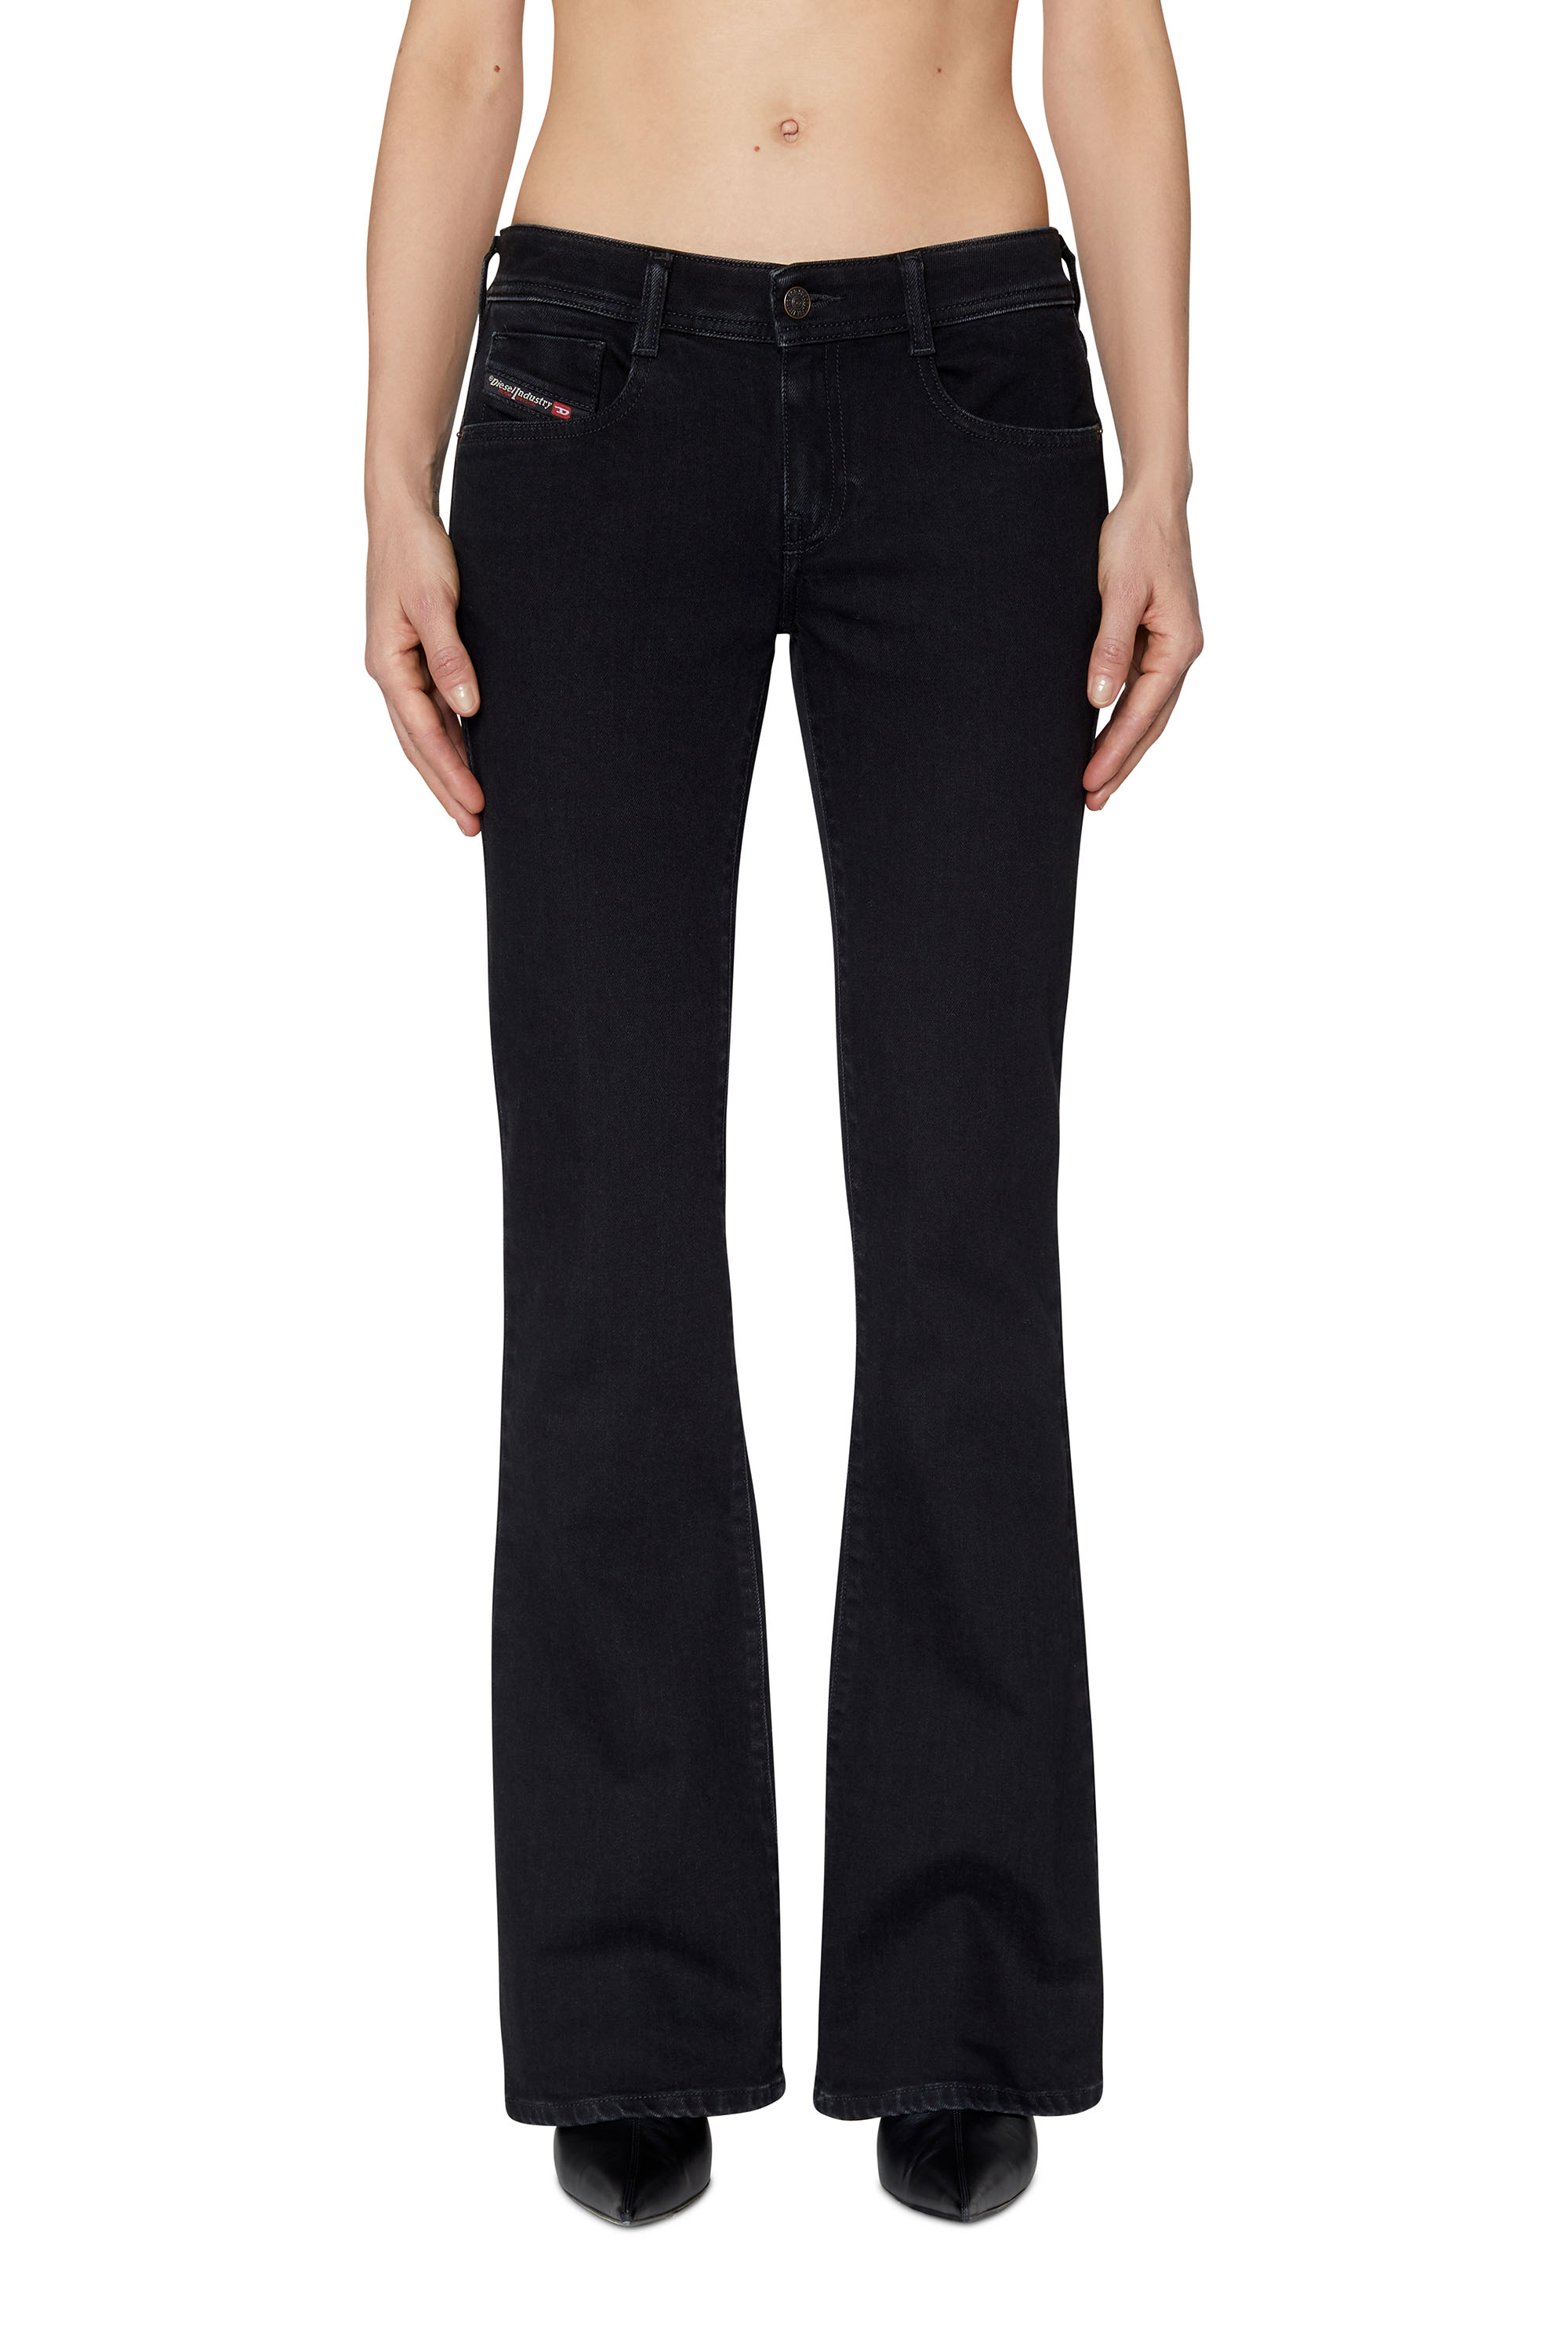 1969 D-EBBEY Z9C25 Bootcut and Flare Jeans, Black/Dark grey - Jeans